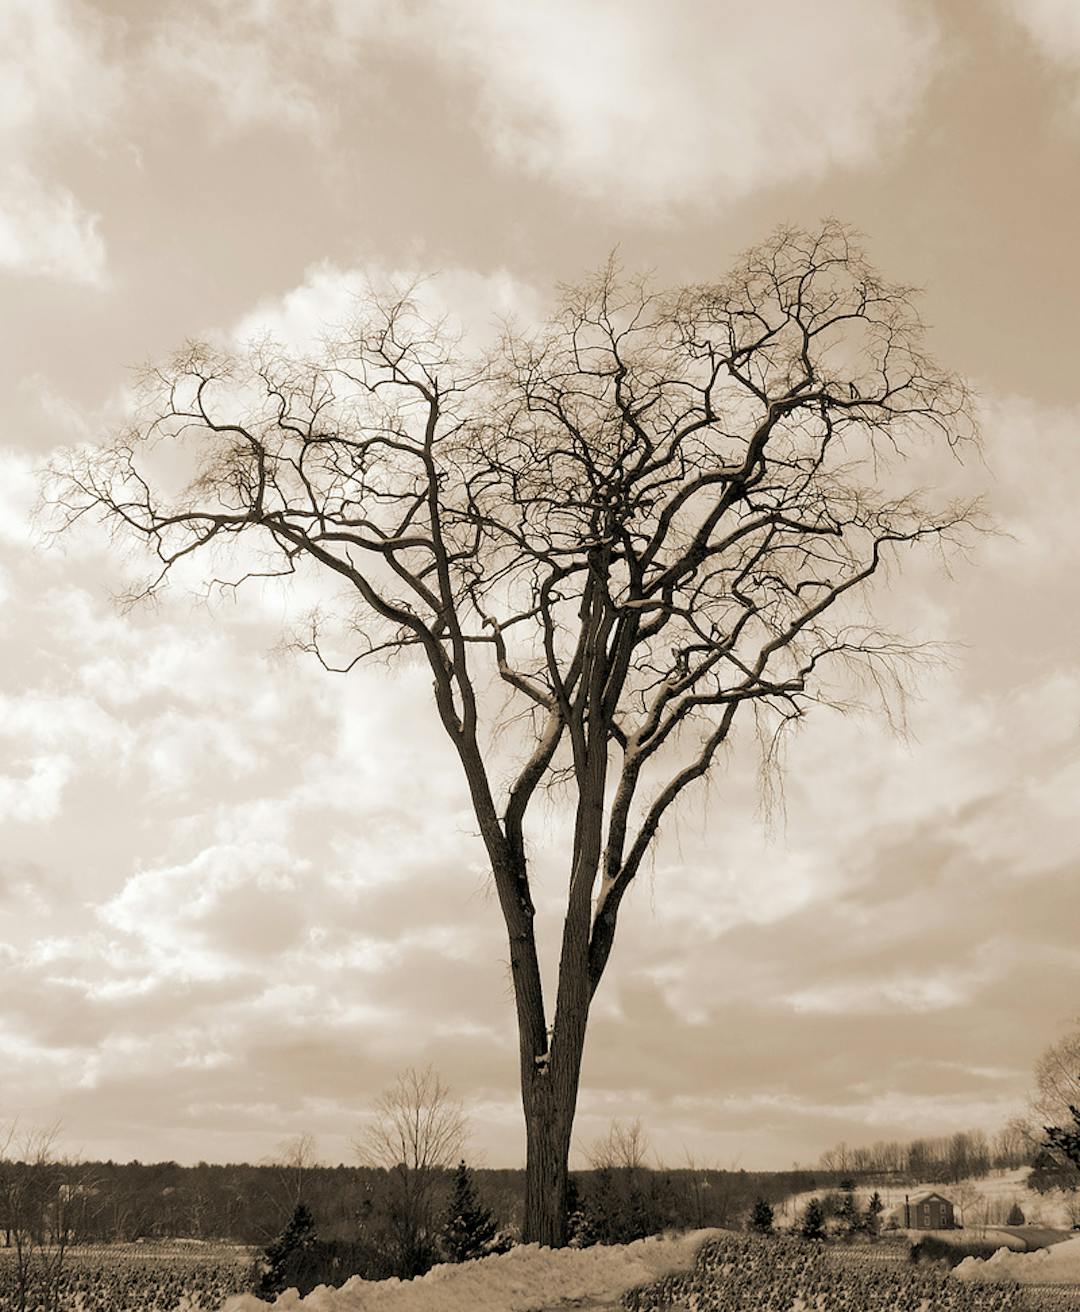 The tree is located on the Robert Strang property
on the Jericho/Essex town line, Vermont Route 15, and has remarkably survived the
ravages of both Dutch Elm Disease and the ubiquitous road salt to reach its current
youthful majestic height.